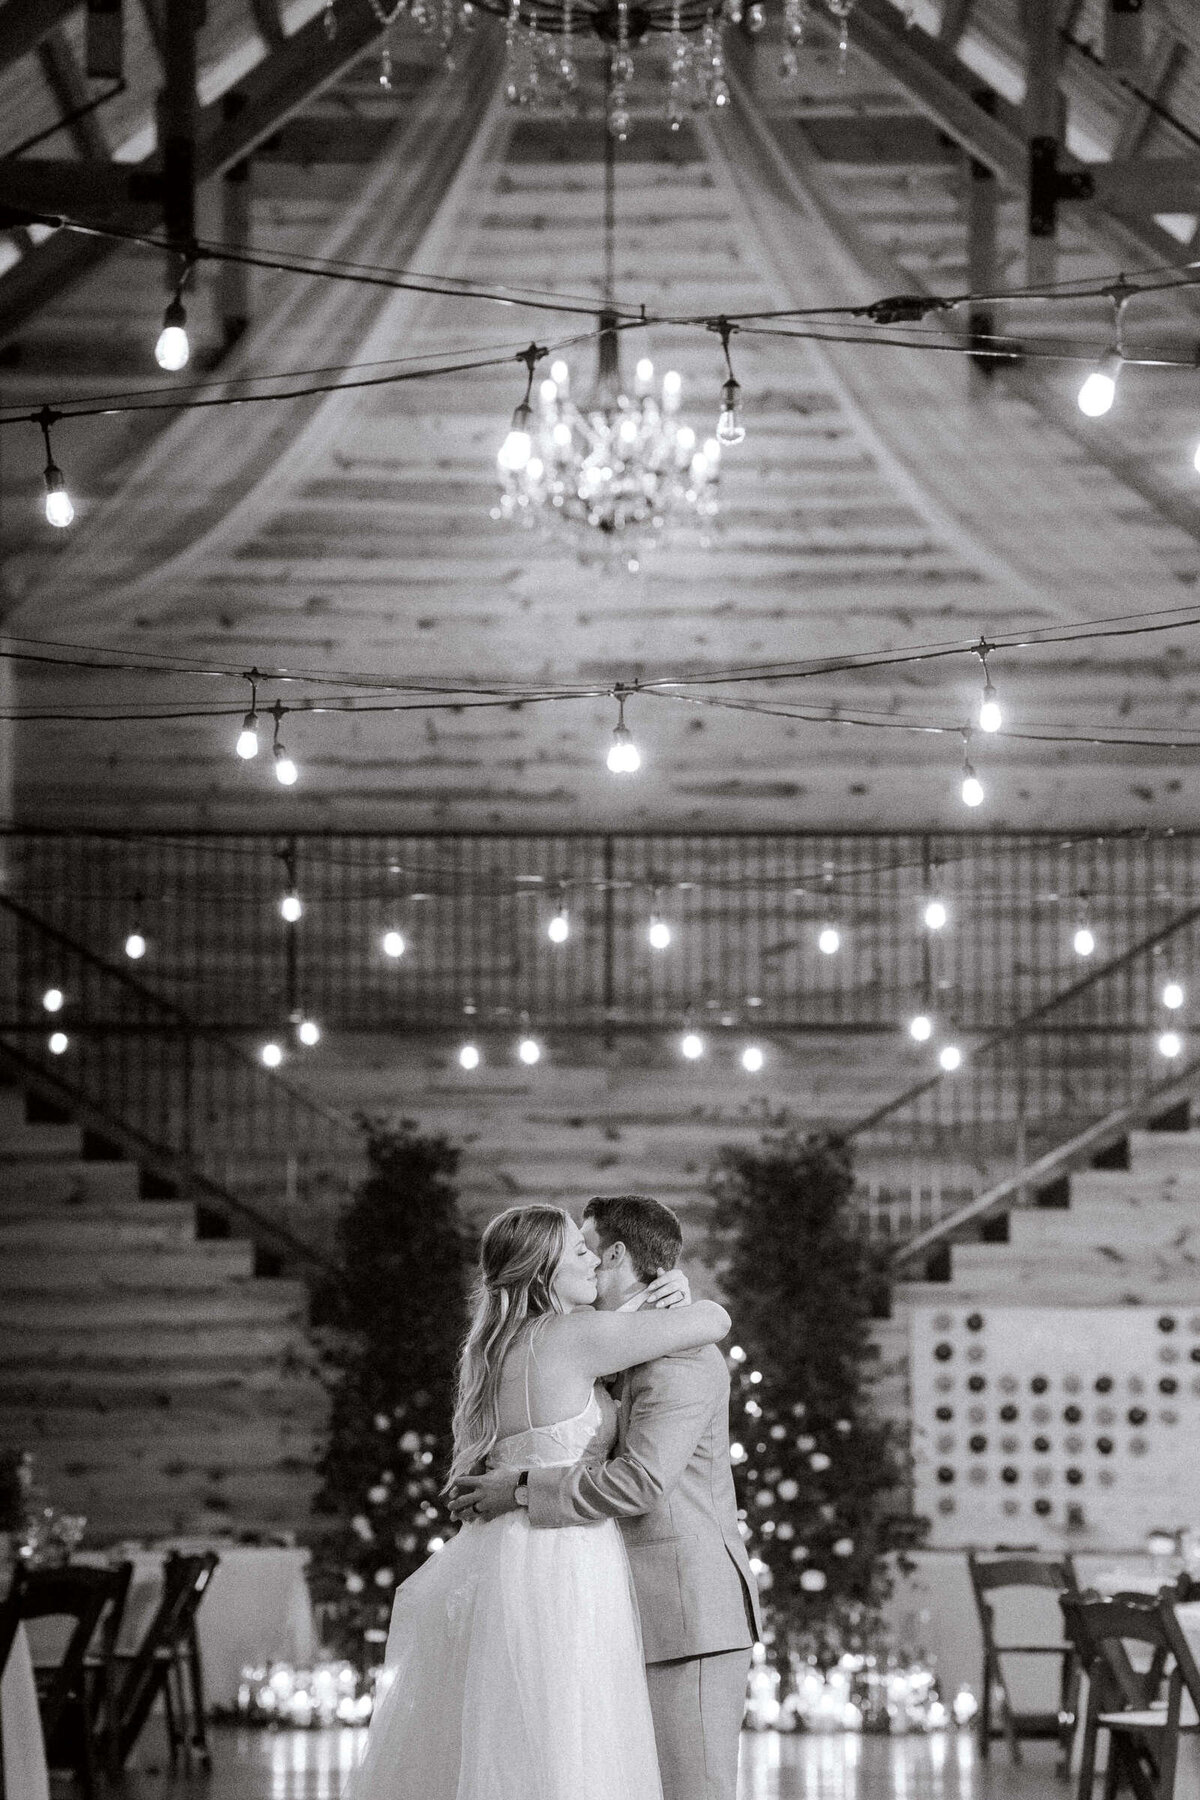 Newly married bride and groom share first dance at rustic winter wedding in Texas with string lights overhead